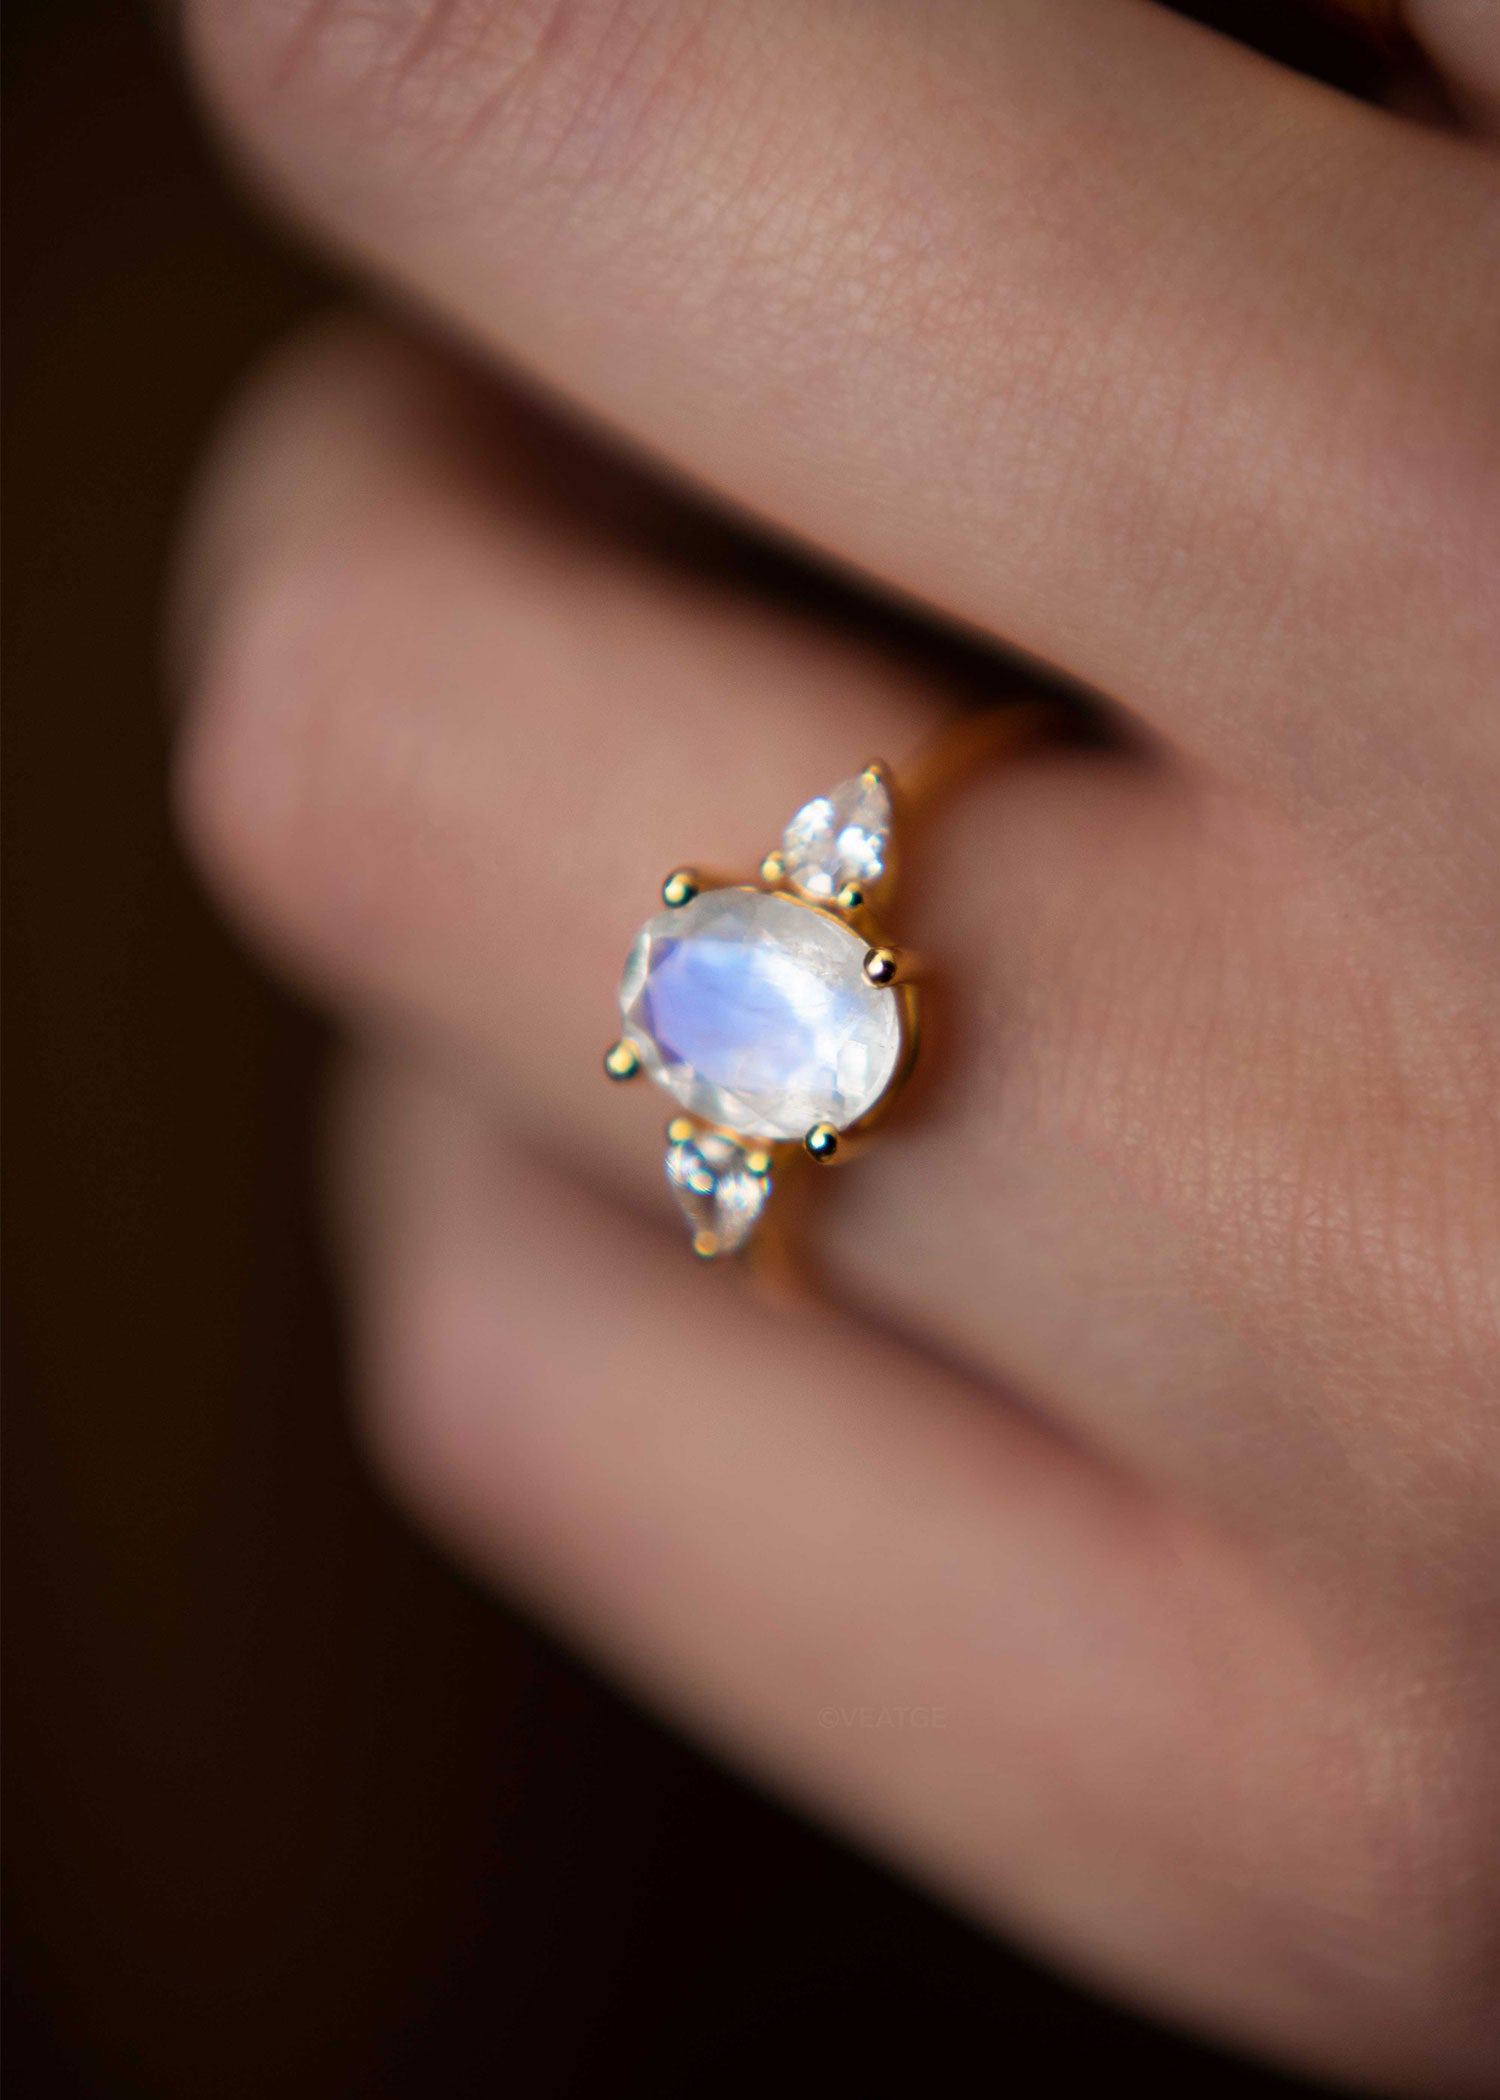 Genuine Natural Moonstone Florence Wedding Engagement Promise Ring Gold Silver Gifts for Women Birthday Anniversary Mothers day gifts for her